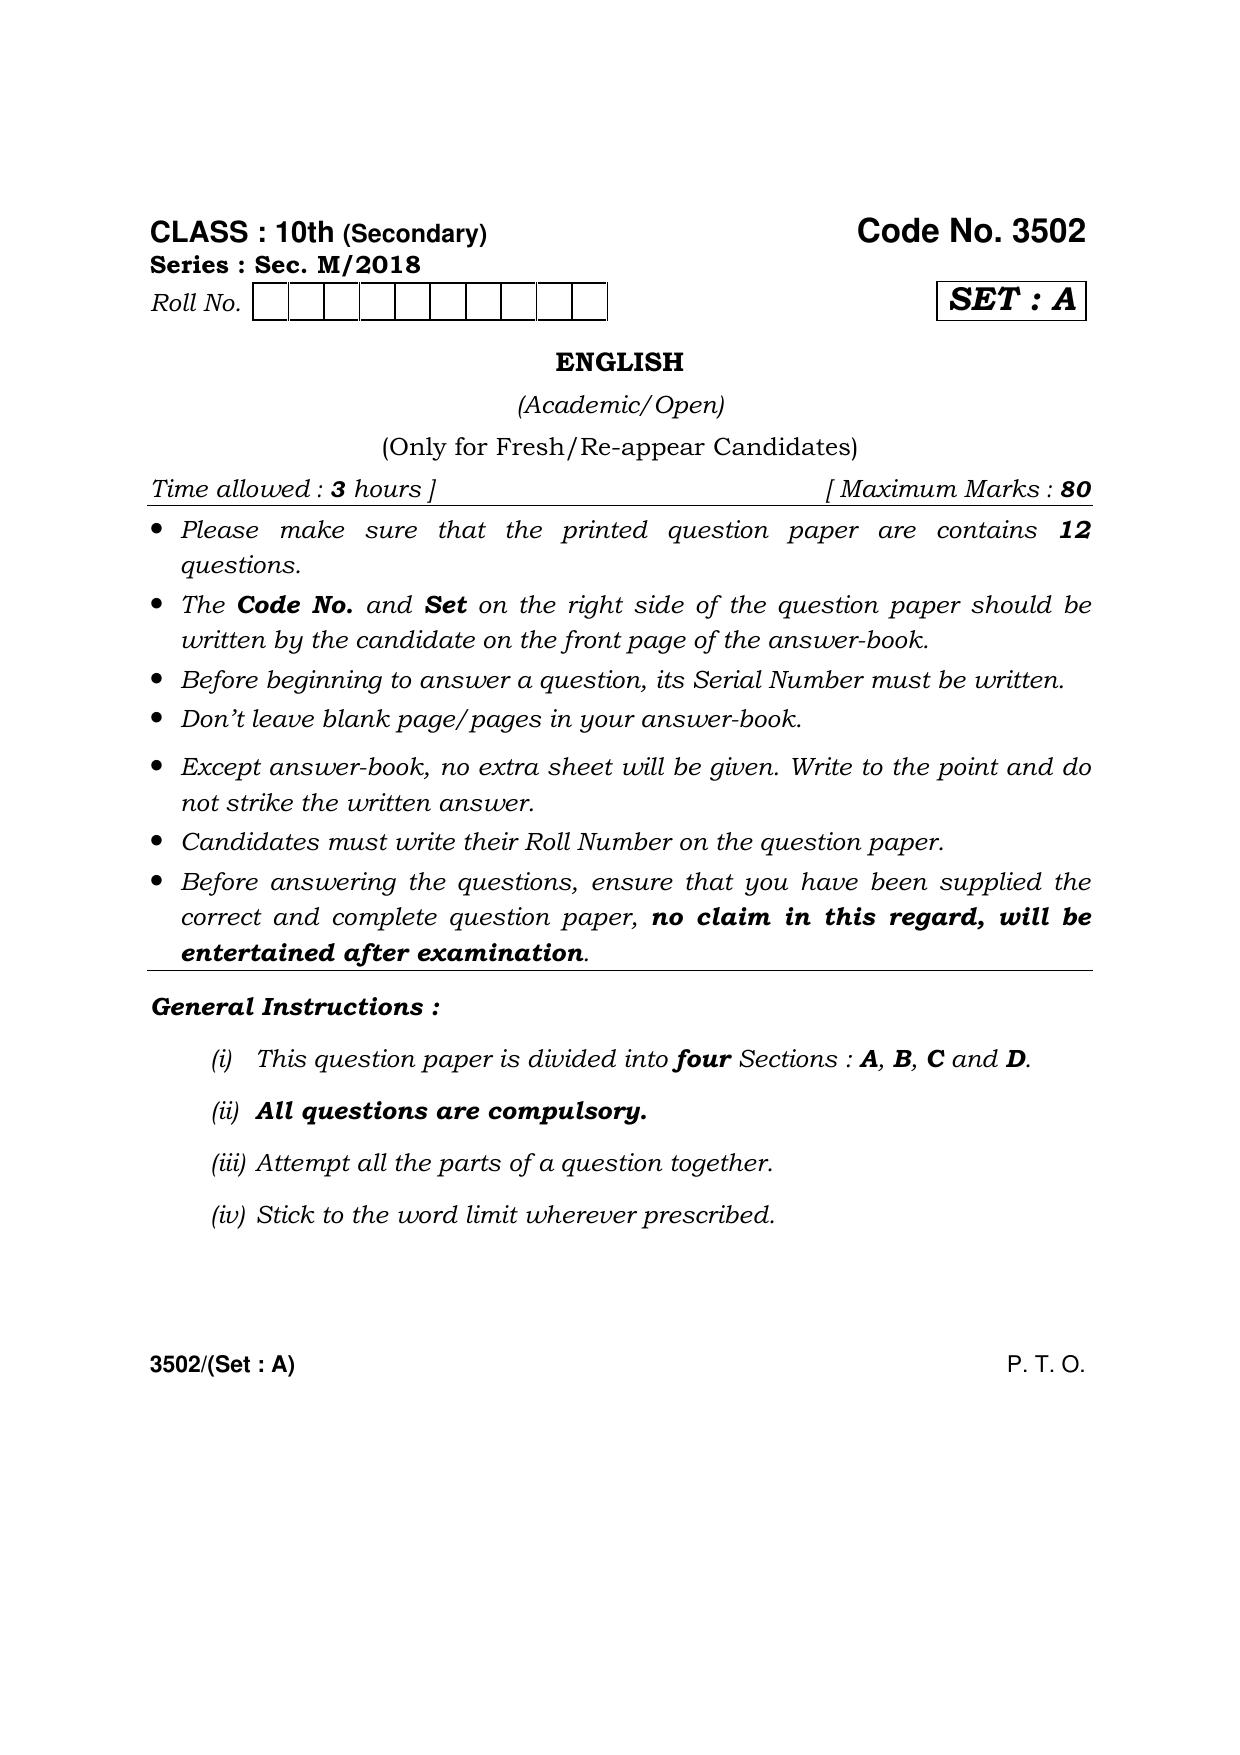 Haryana Board HBSE Class 10 English -A 2018 Question Paper - Page 1